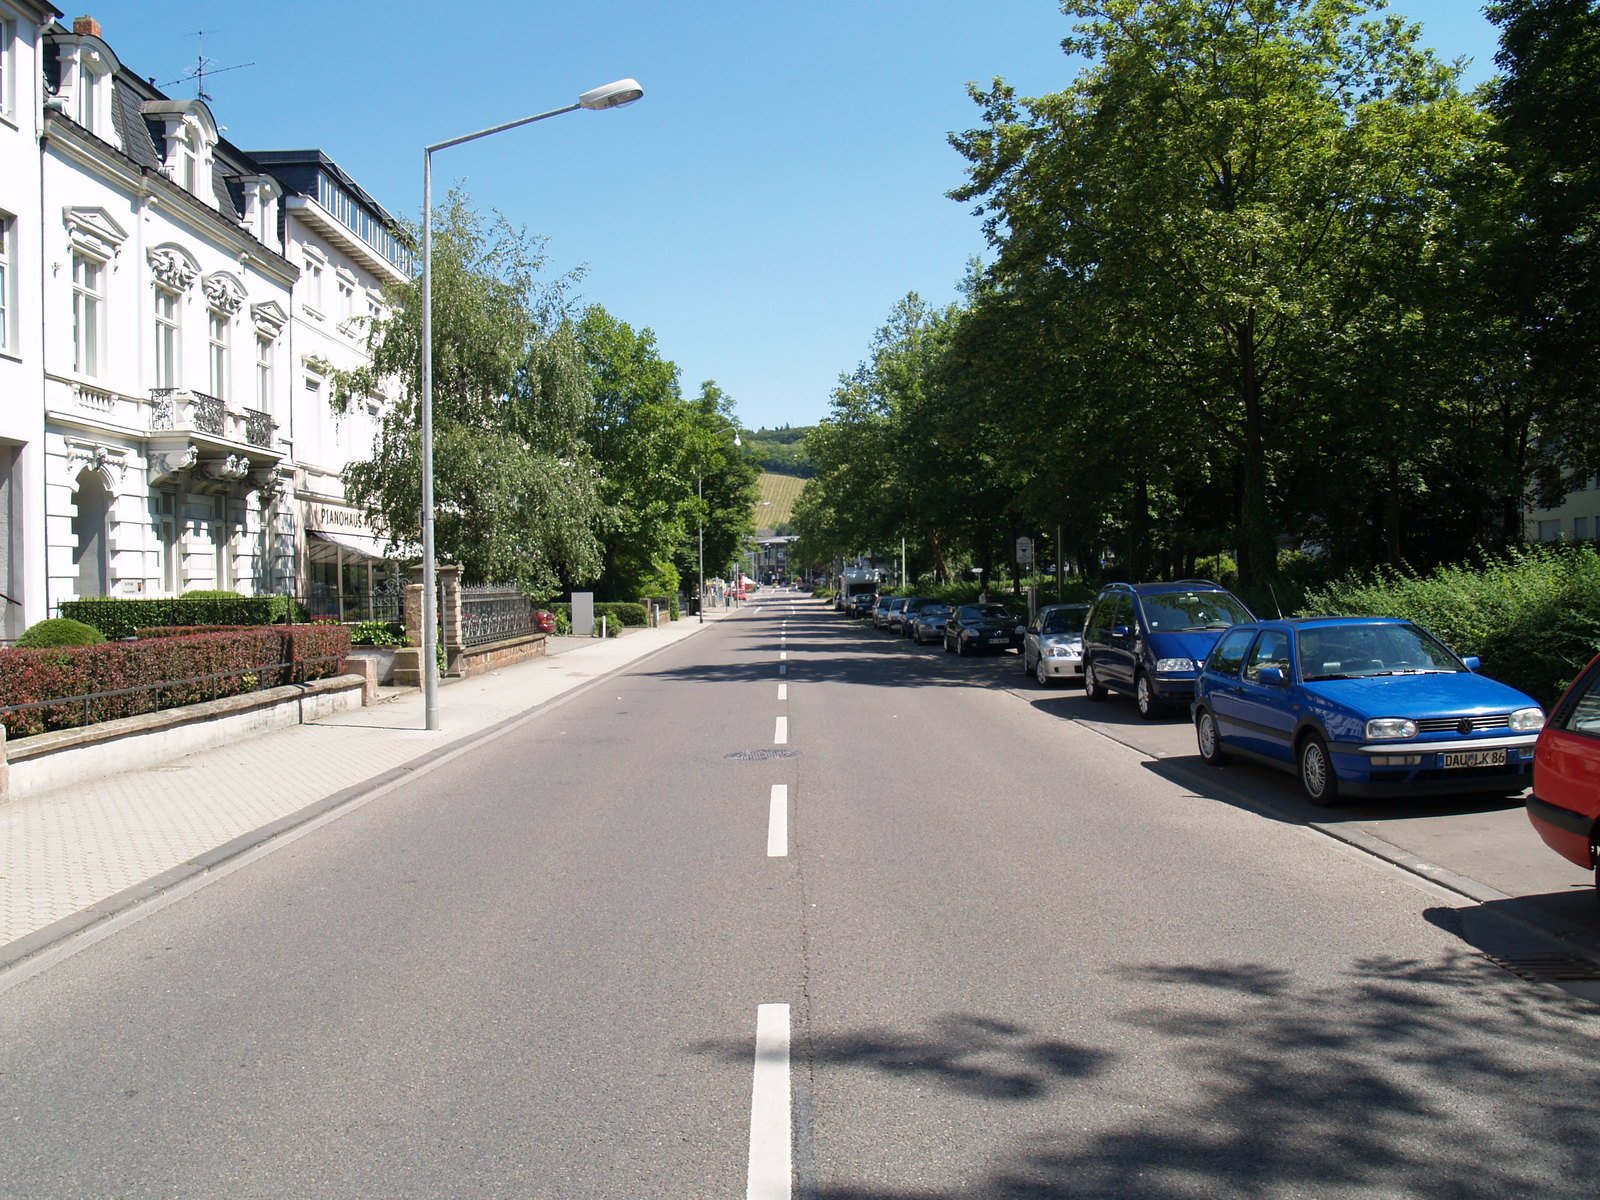 a road surrounded by trees and building near street